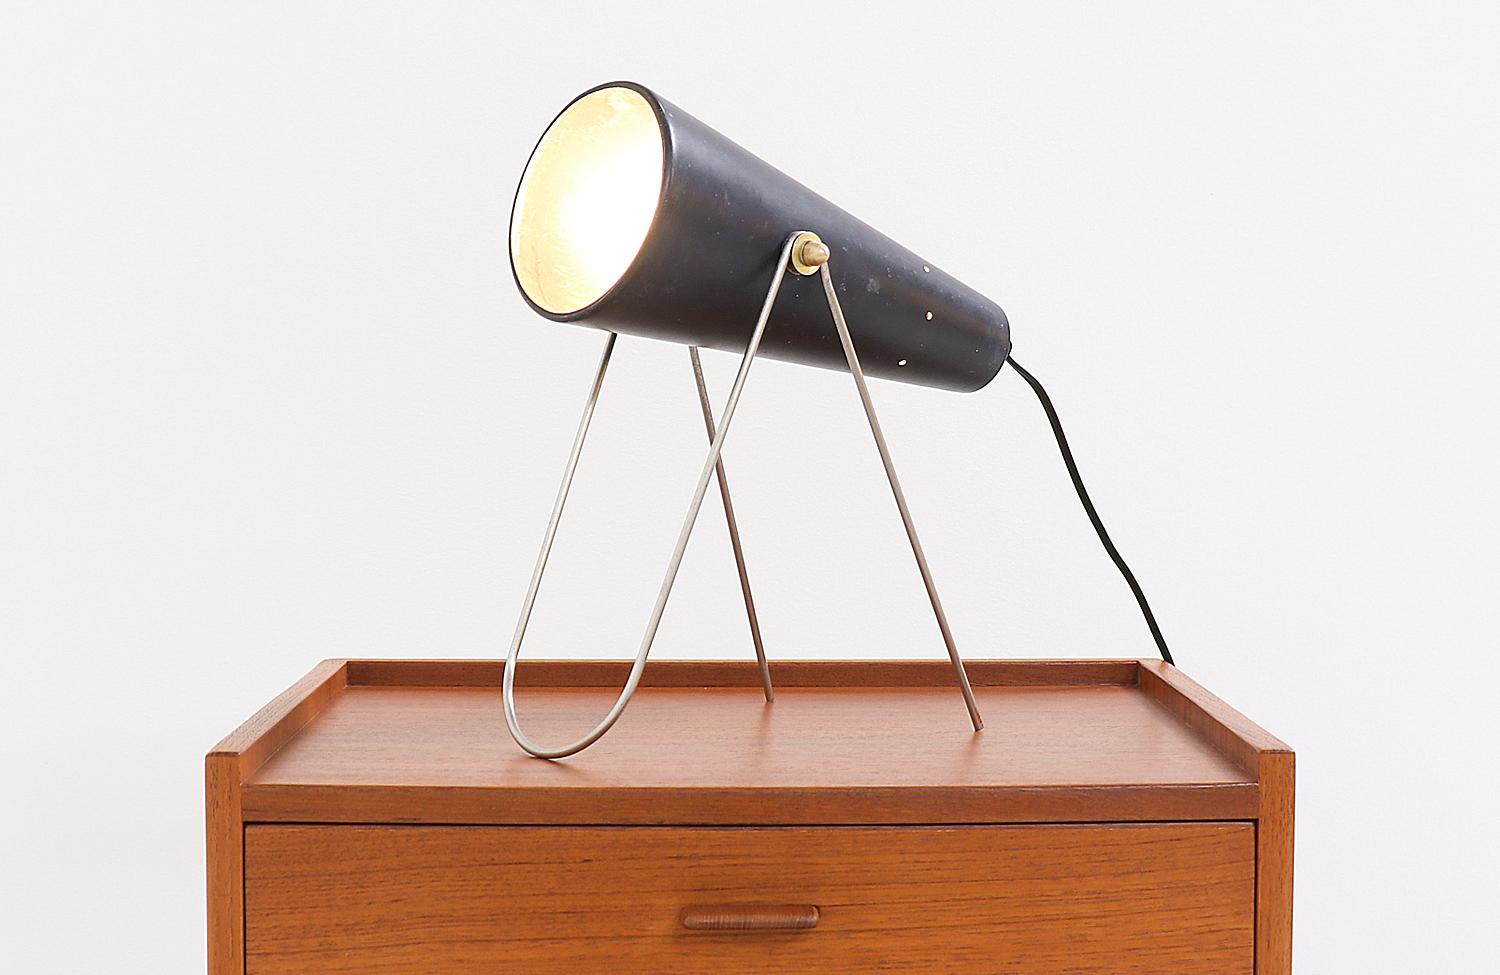 Stylish table lamp by Los Angeles based designer, Vincent Cilurzo, circa 1950s. Featuring a black enamel metal cone shade that tilts up and down to help function as a spot or directional light. Supported by its wire metal base to help float the cone